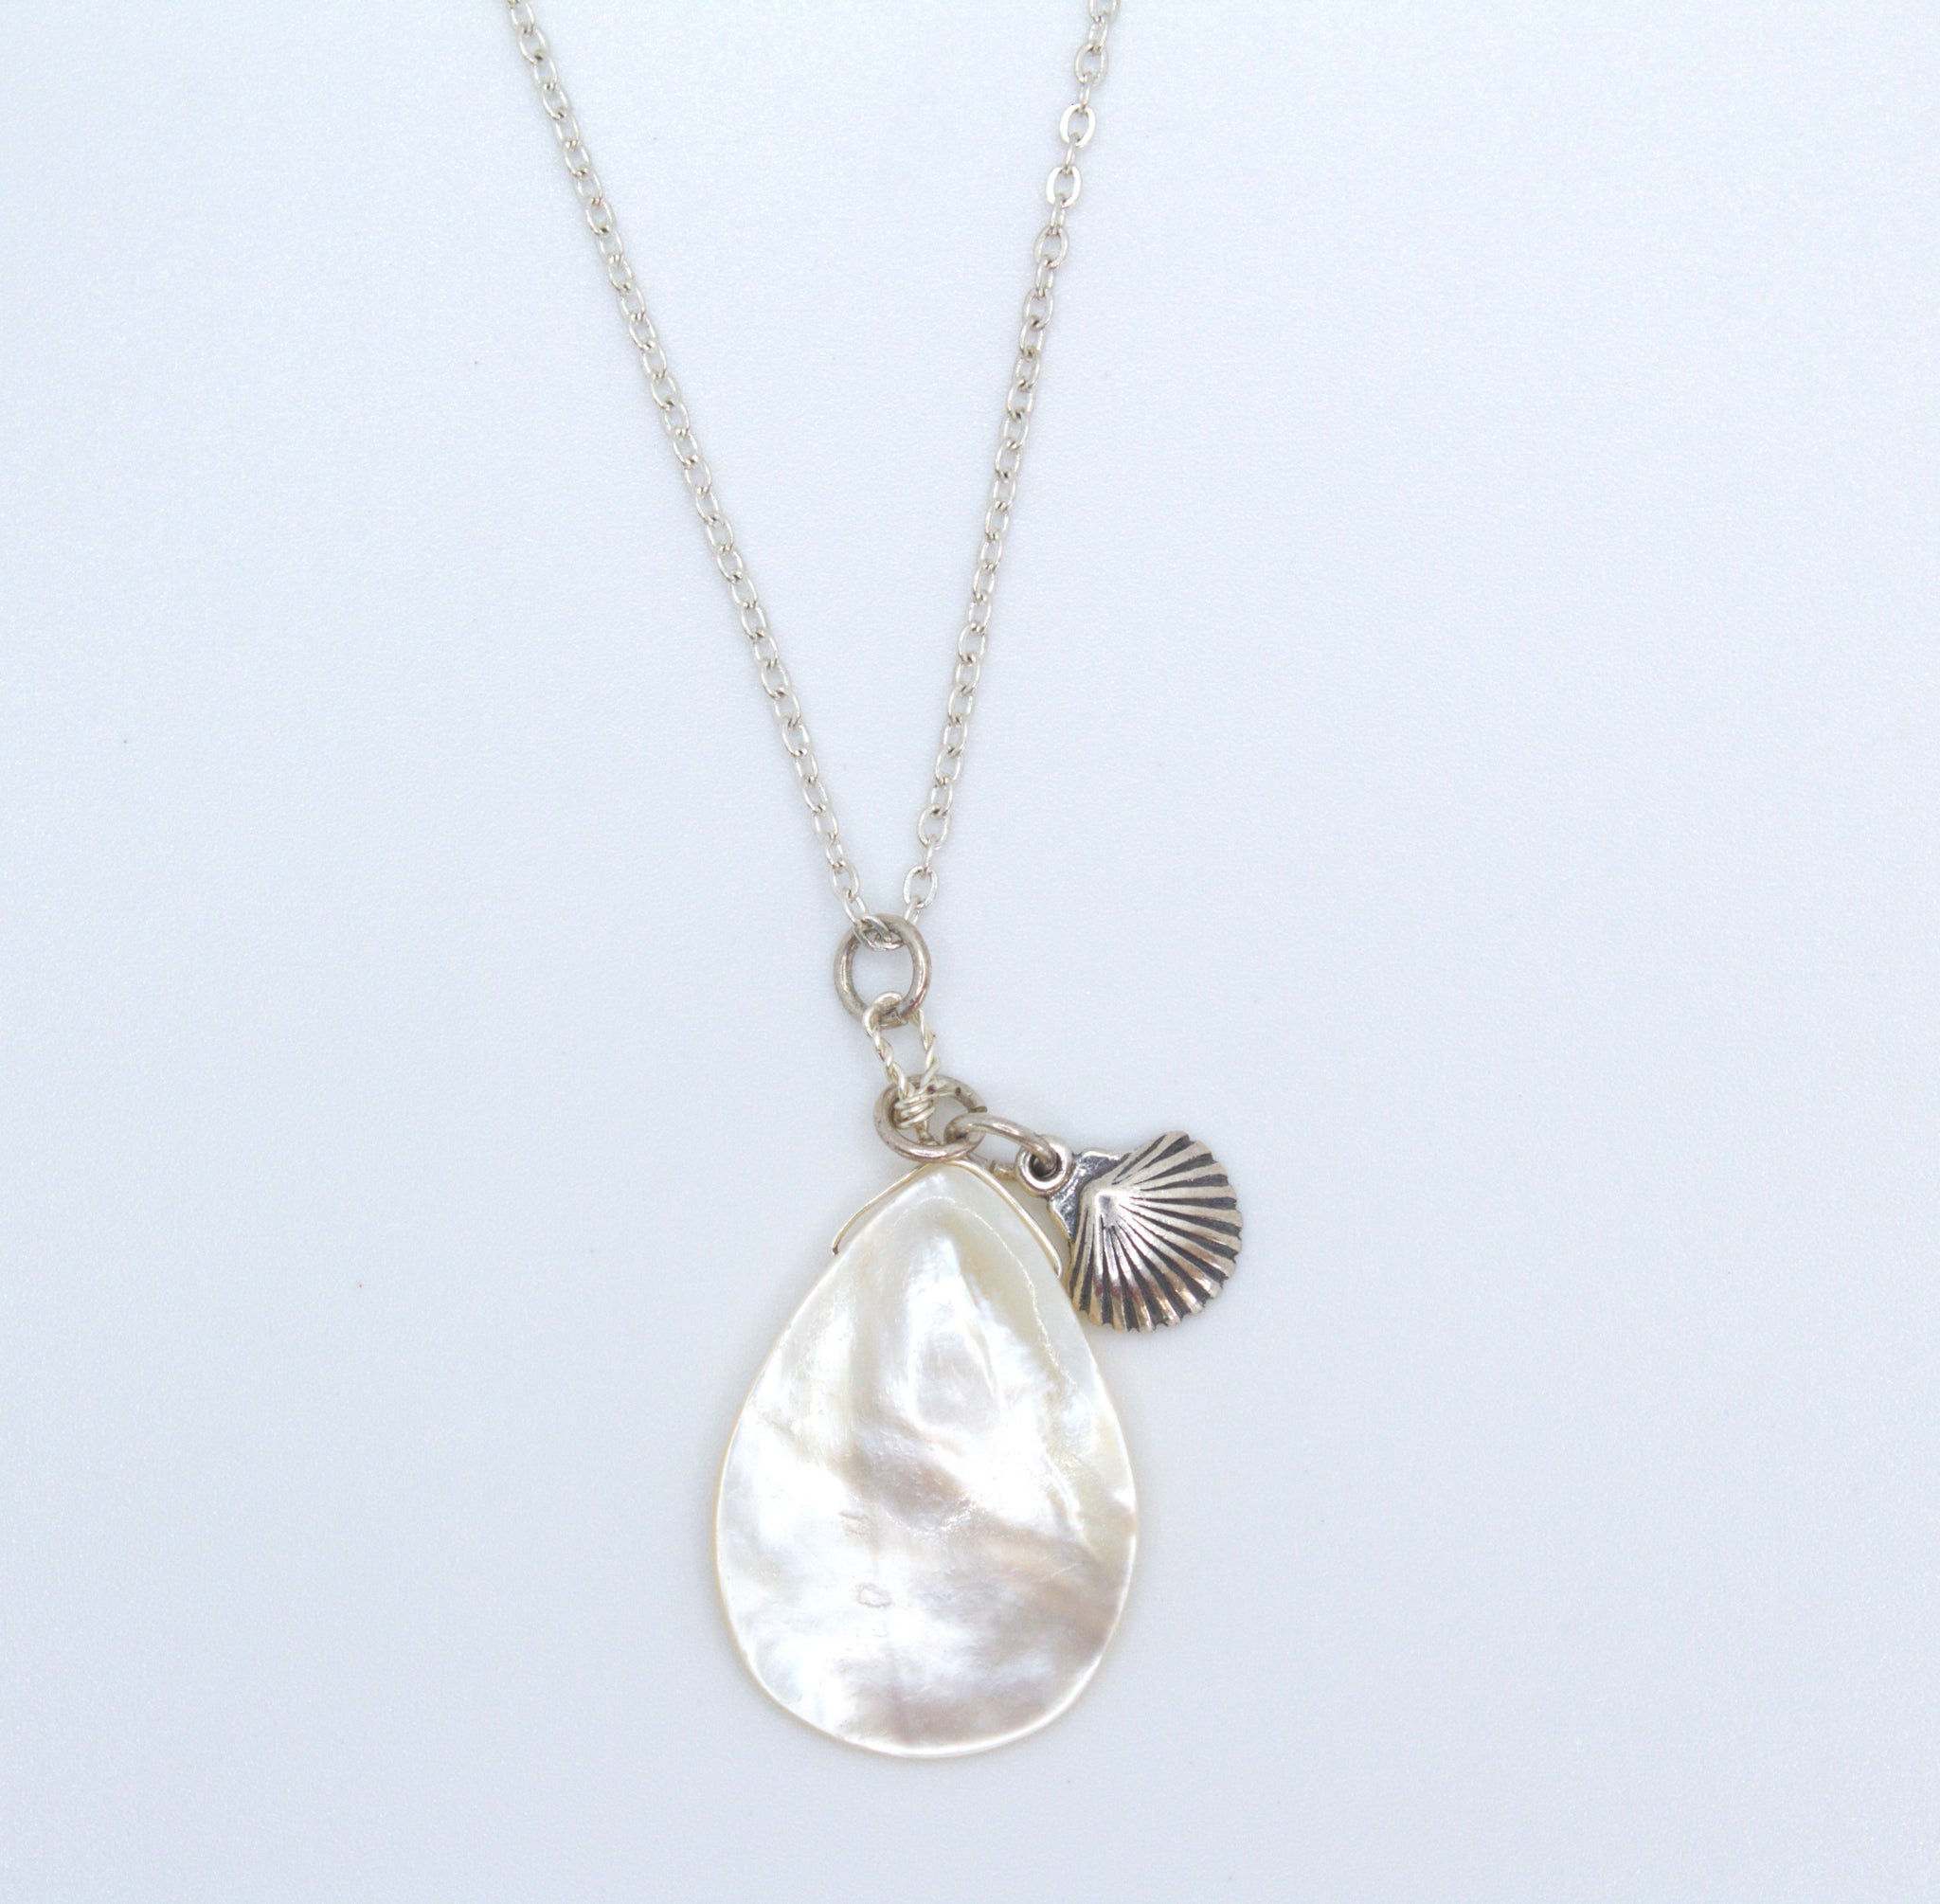 Necklace made of sterling silver with shell of pearl and charm